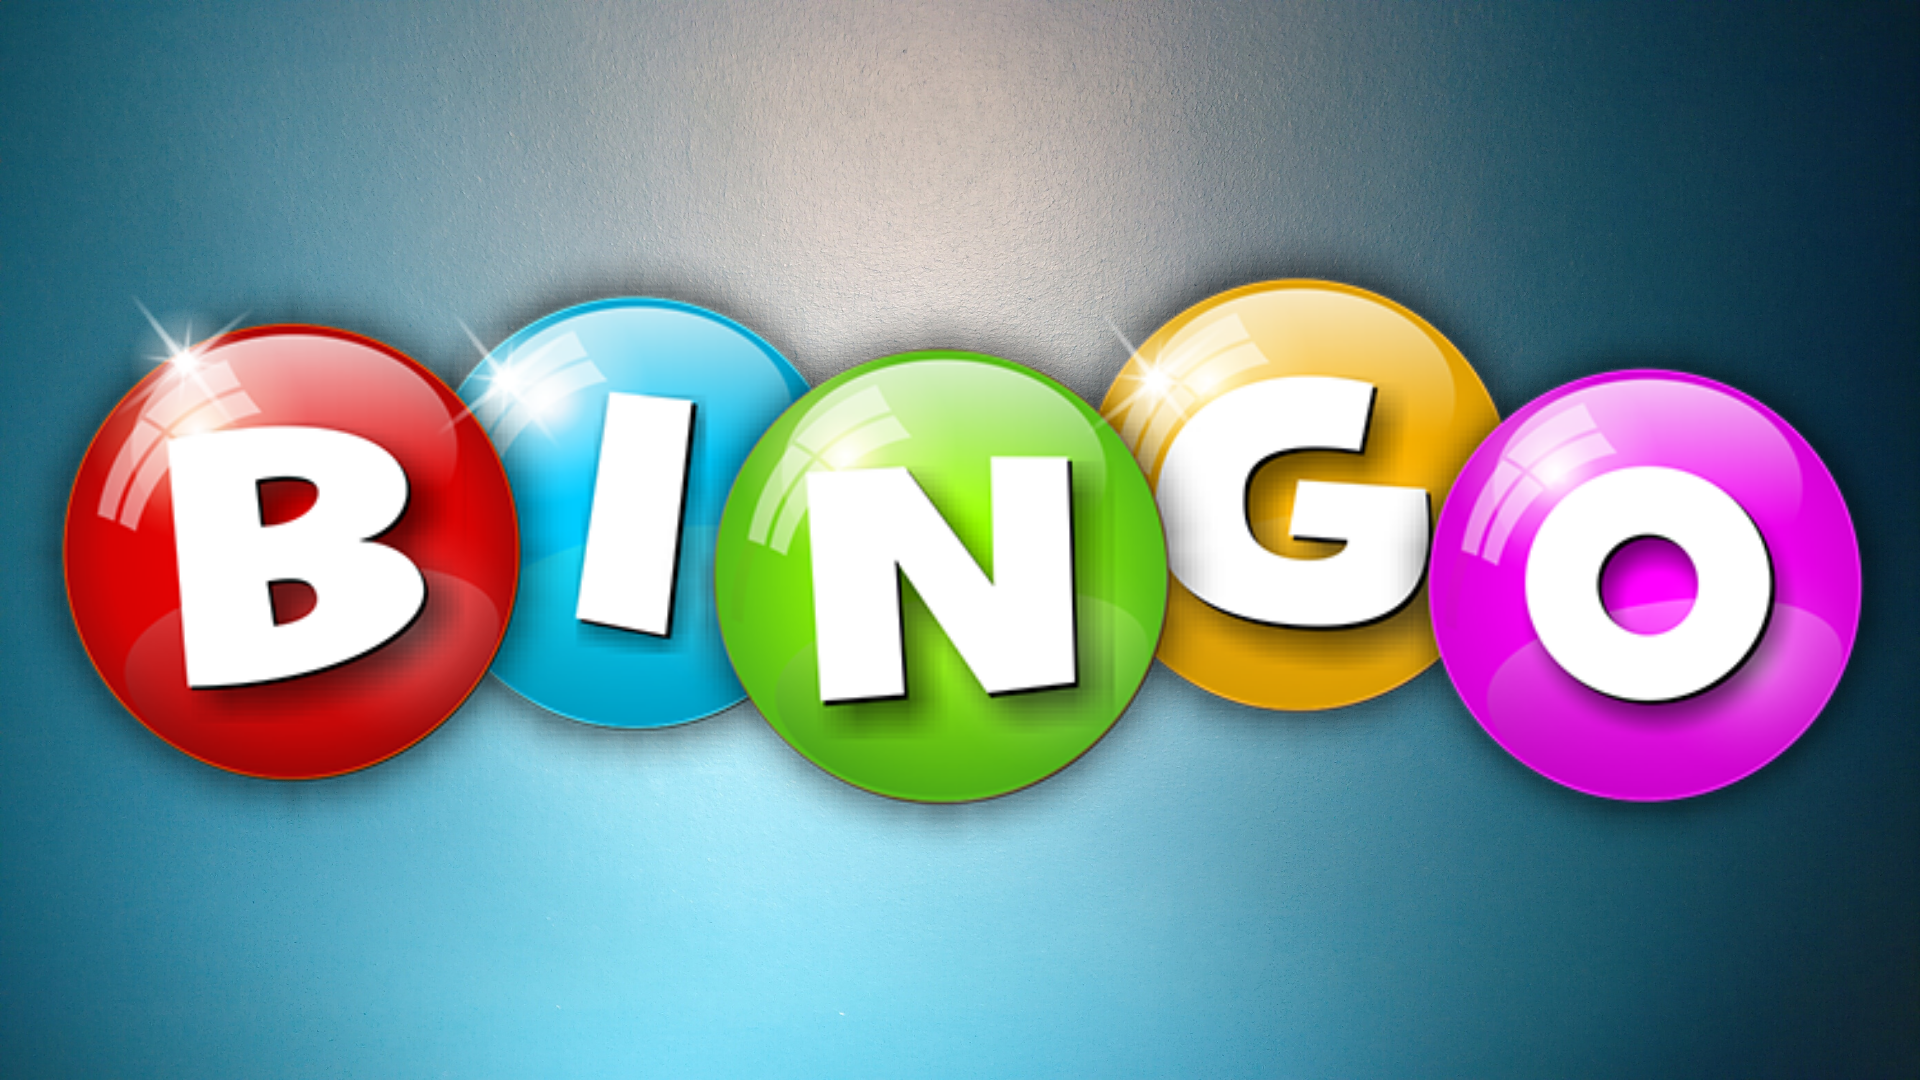 Come try your hand at BINGO!